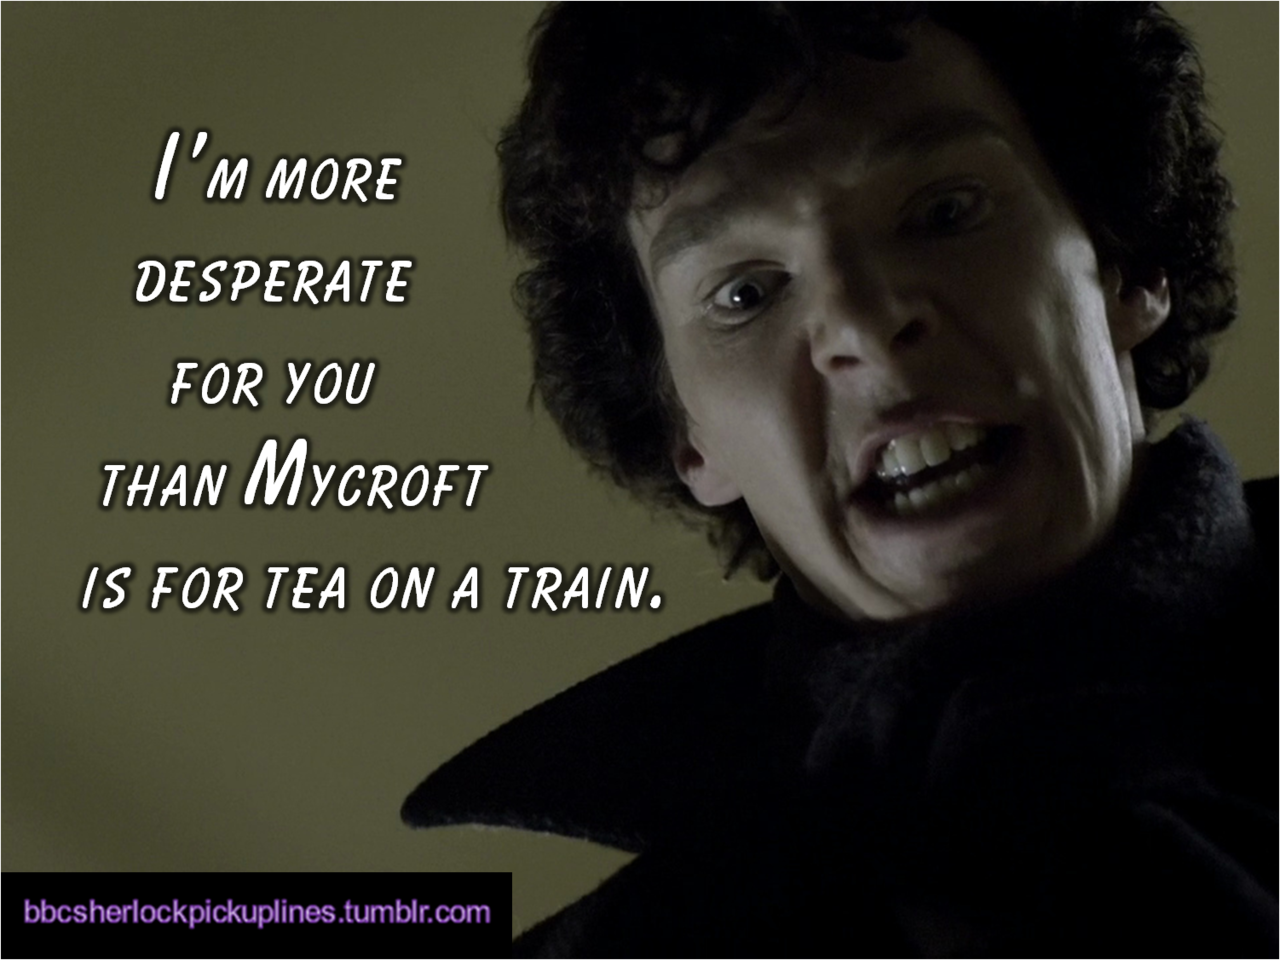 &ldquo;I&rsquo;m more desperate for you than Mycroft is for tea on a train.&rdquo;